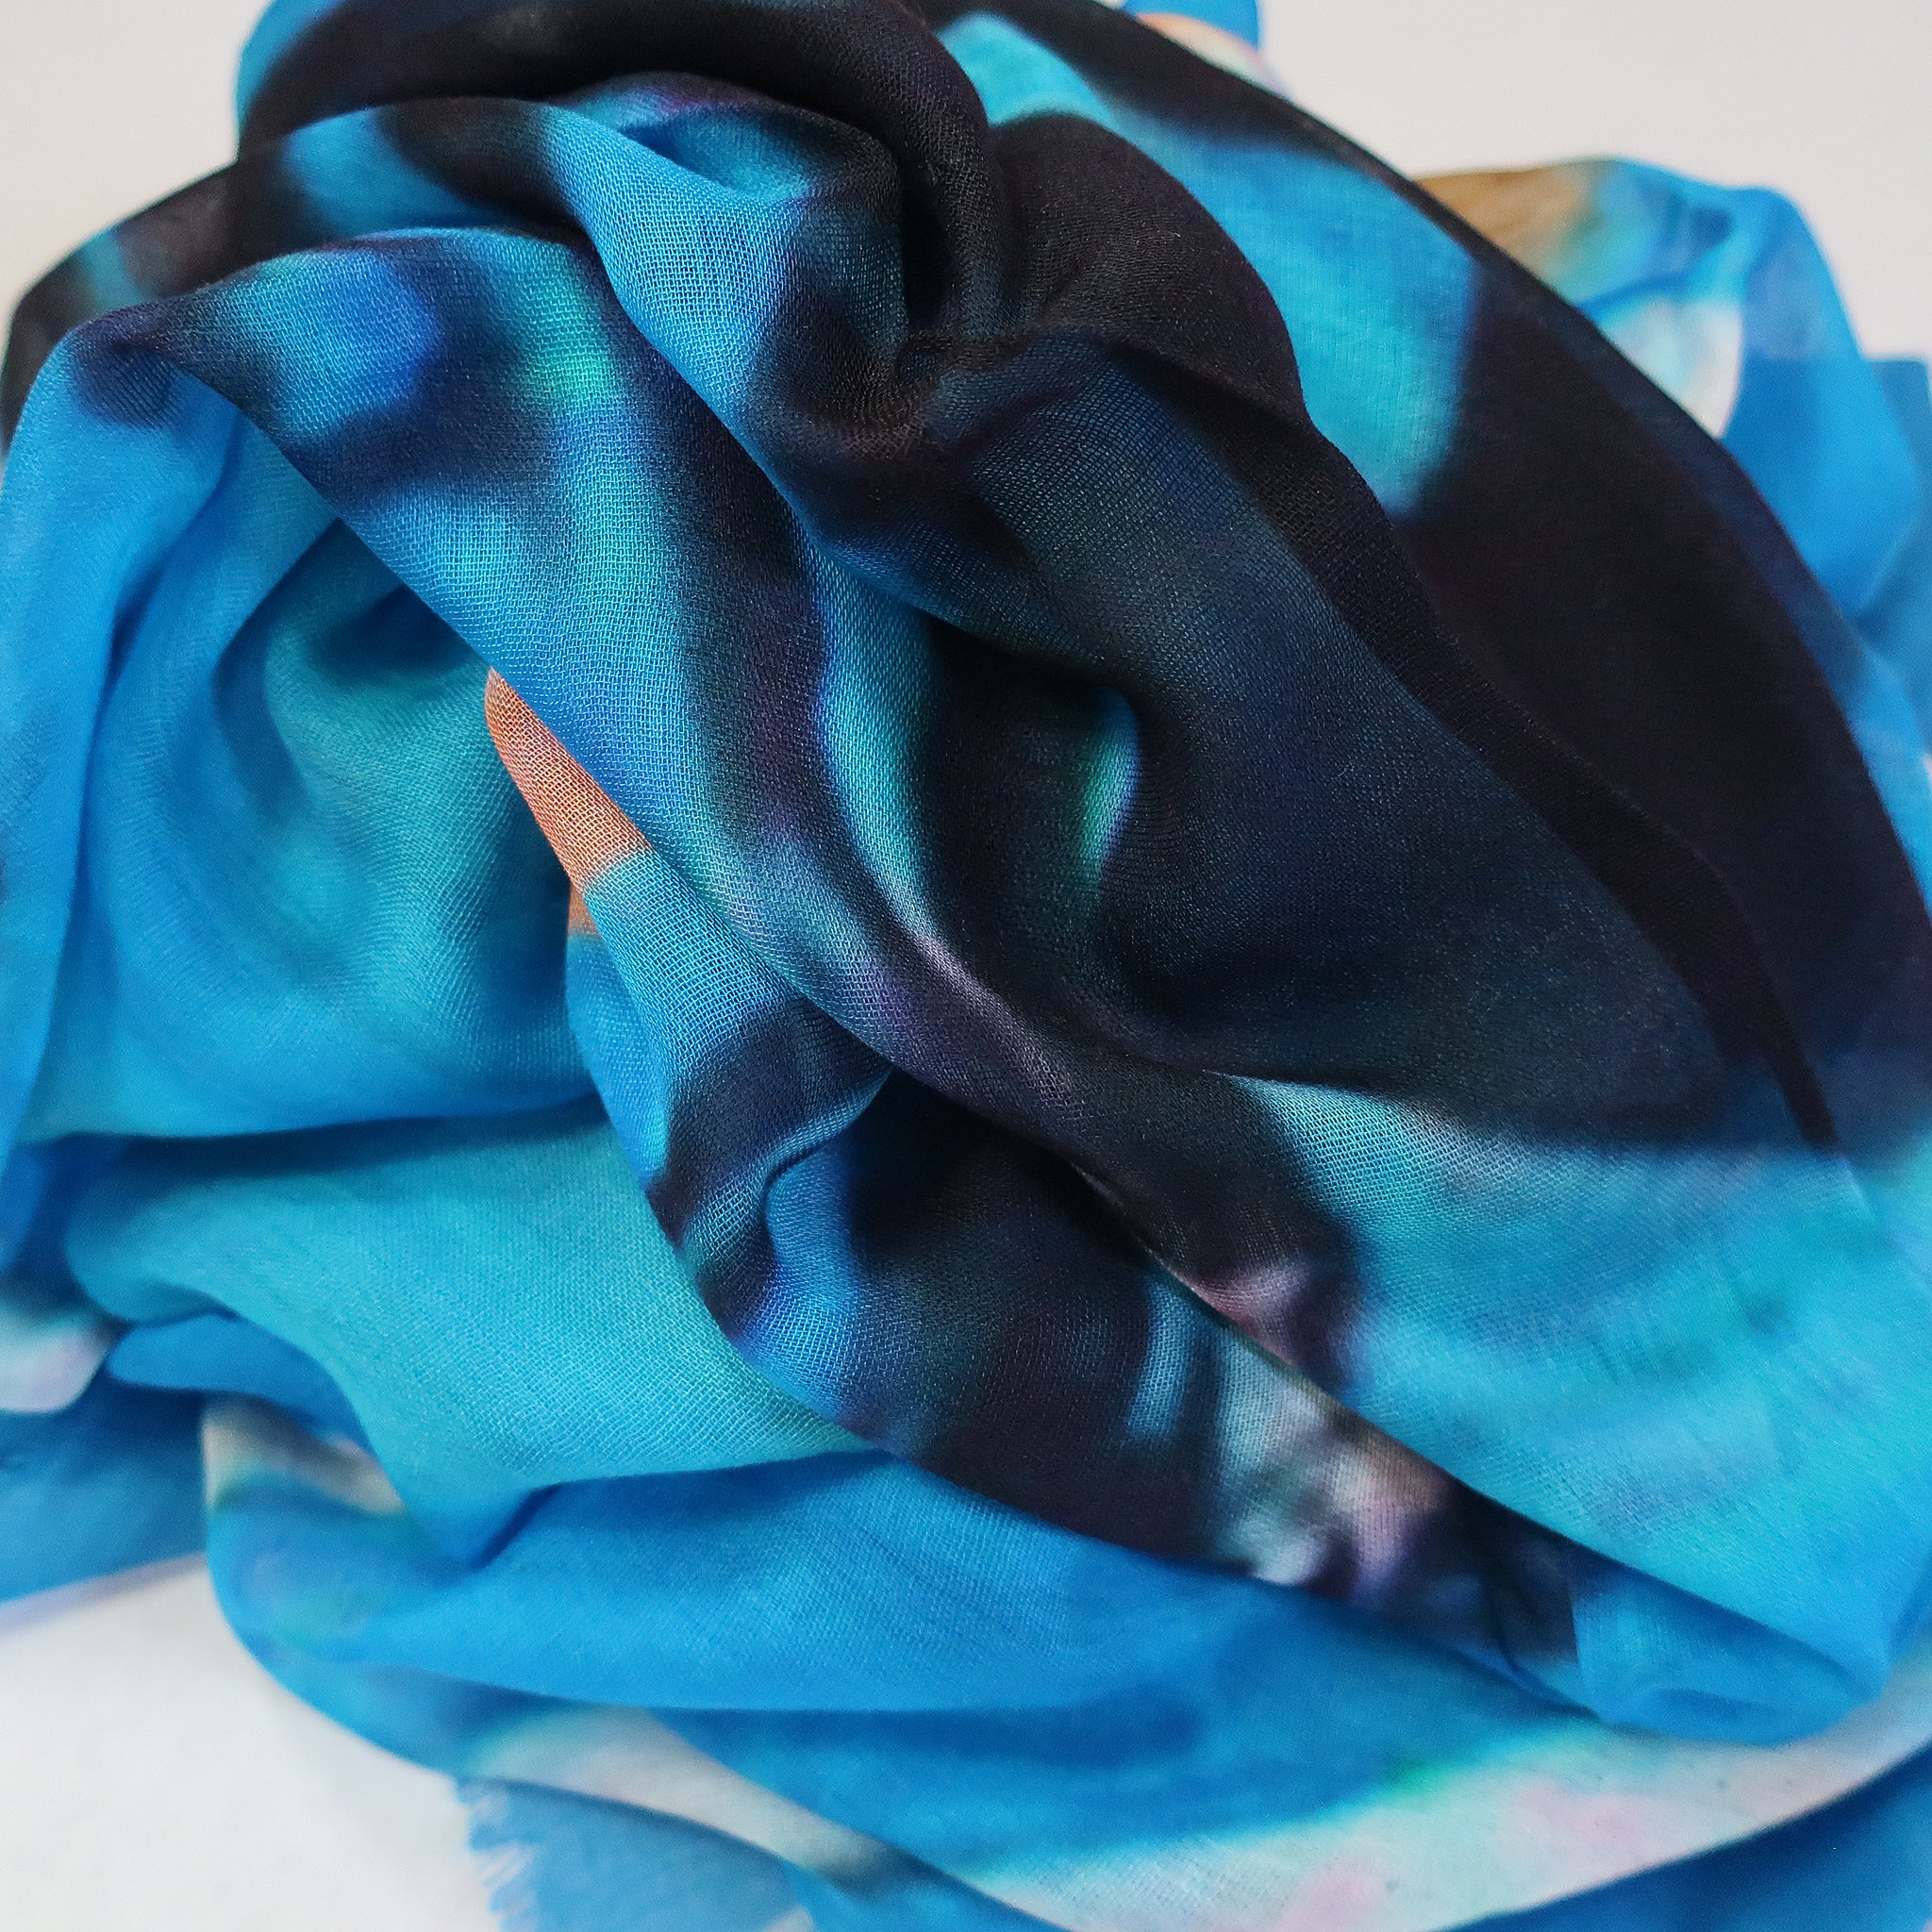 Blue Pacific Vintage Locale Emily in Paris Micromodal Scarf in Cobalt Blue